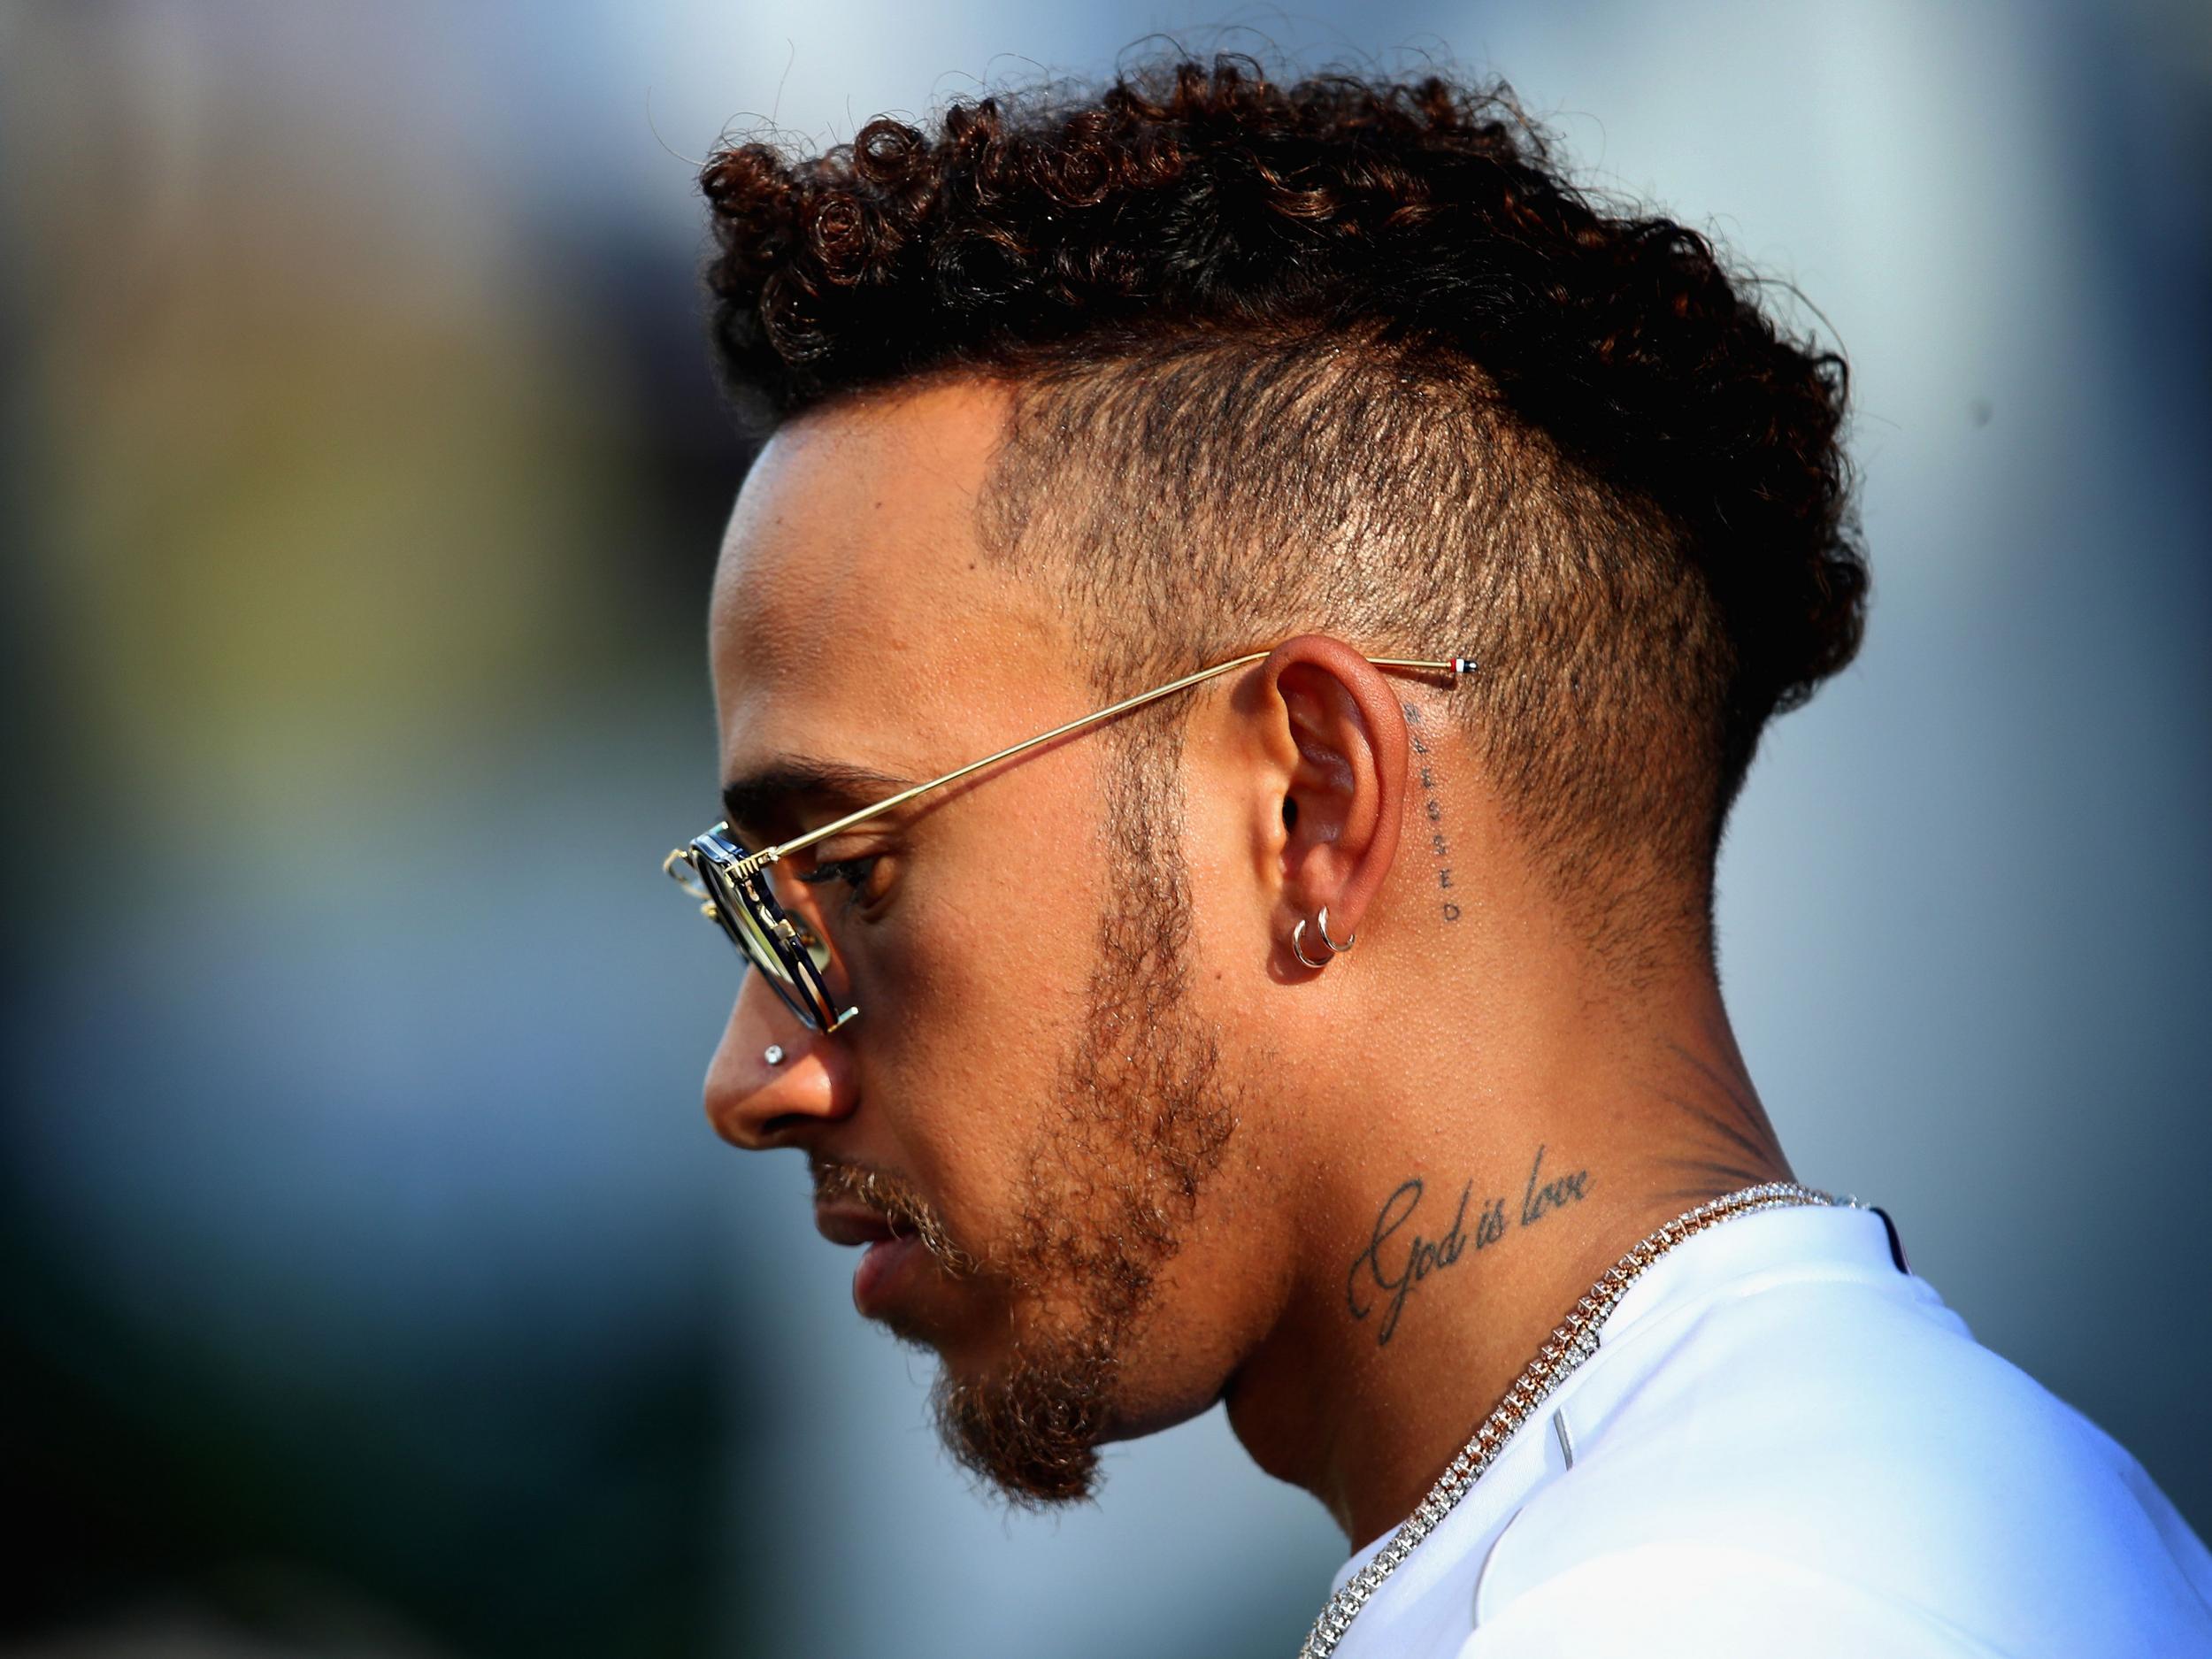 Lewis Hamilton backtracking on F1 retirement plan may be down to Mercedes  anguish | F1 | Sport | Express.co.uk